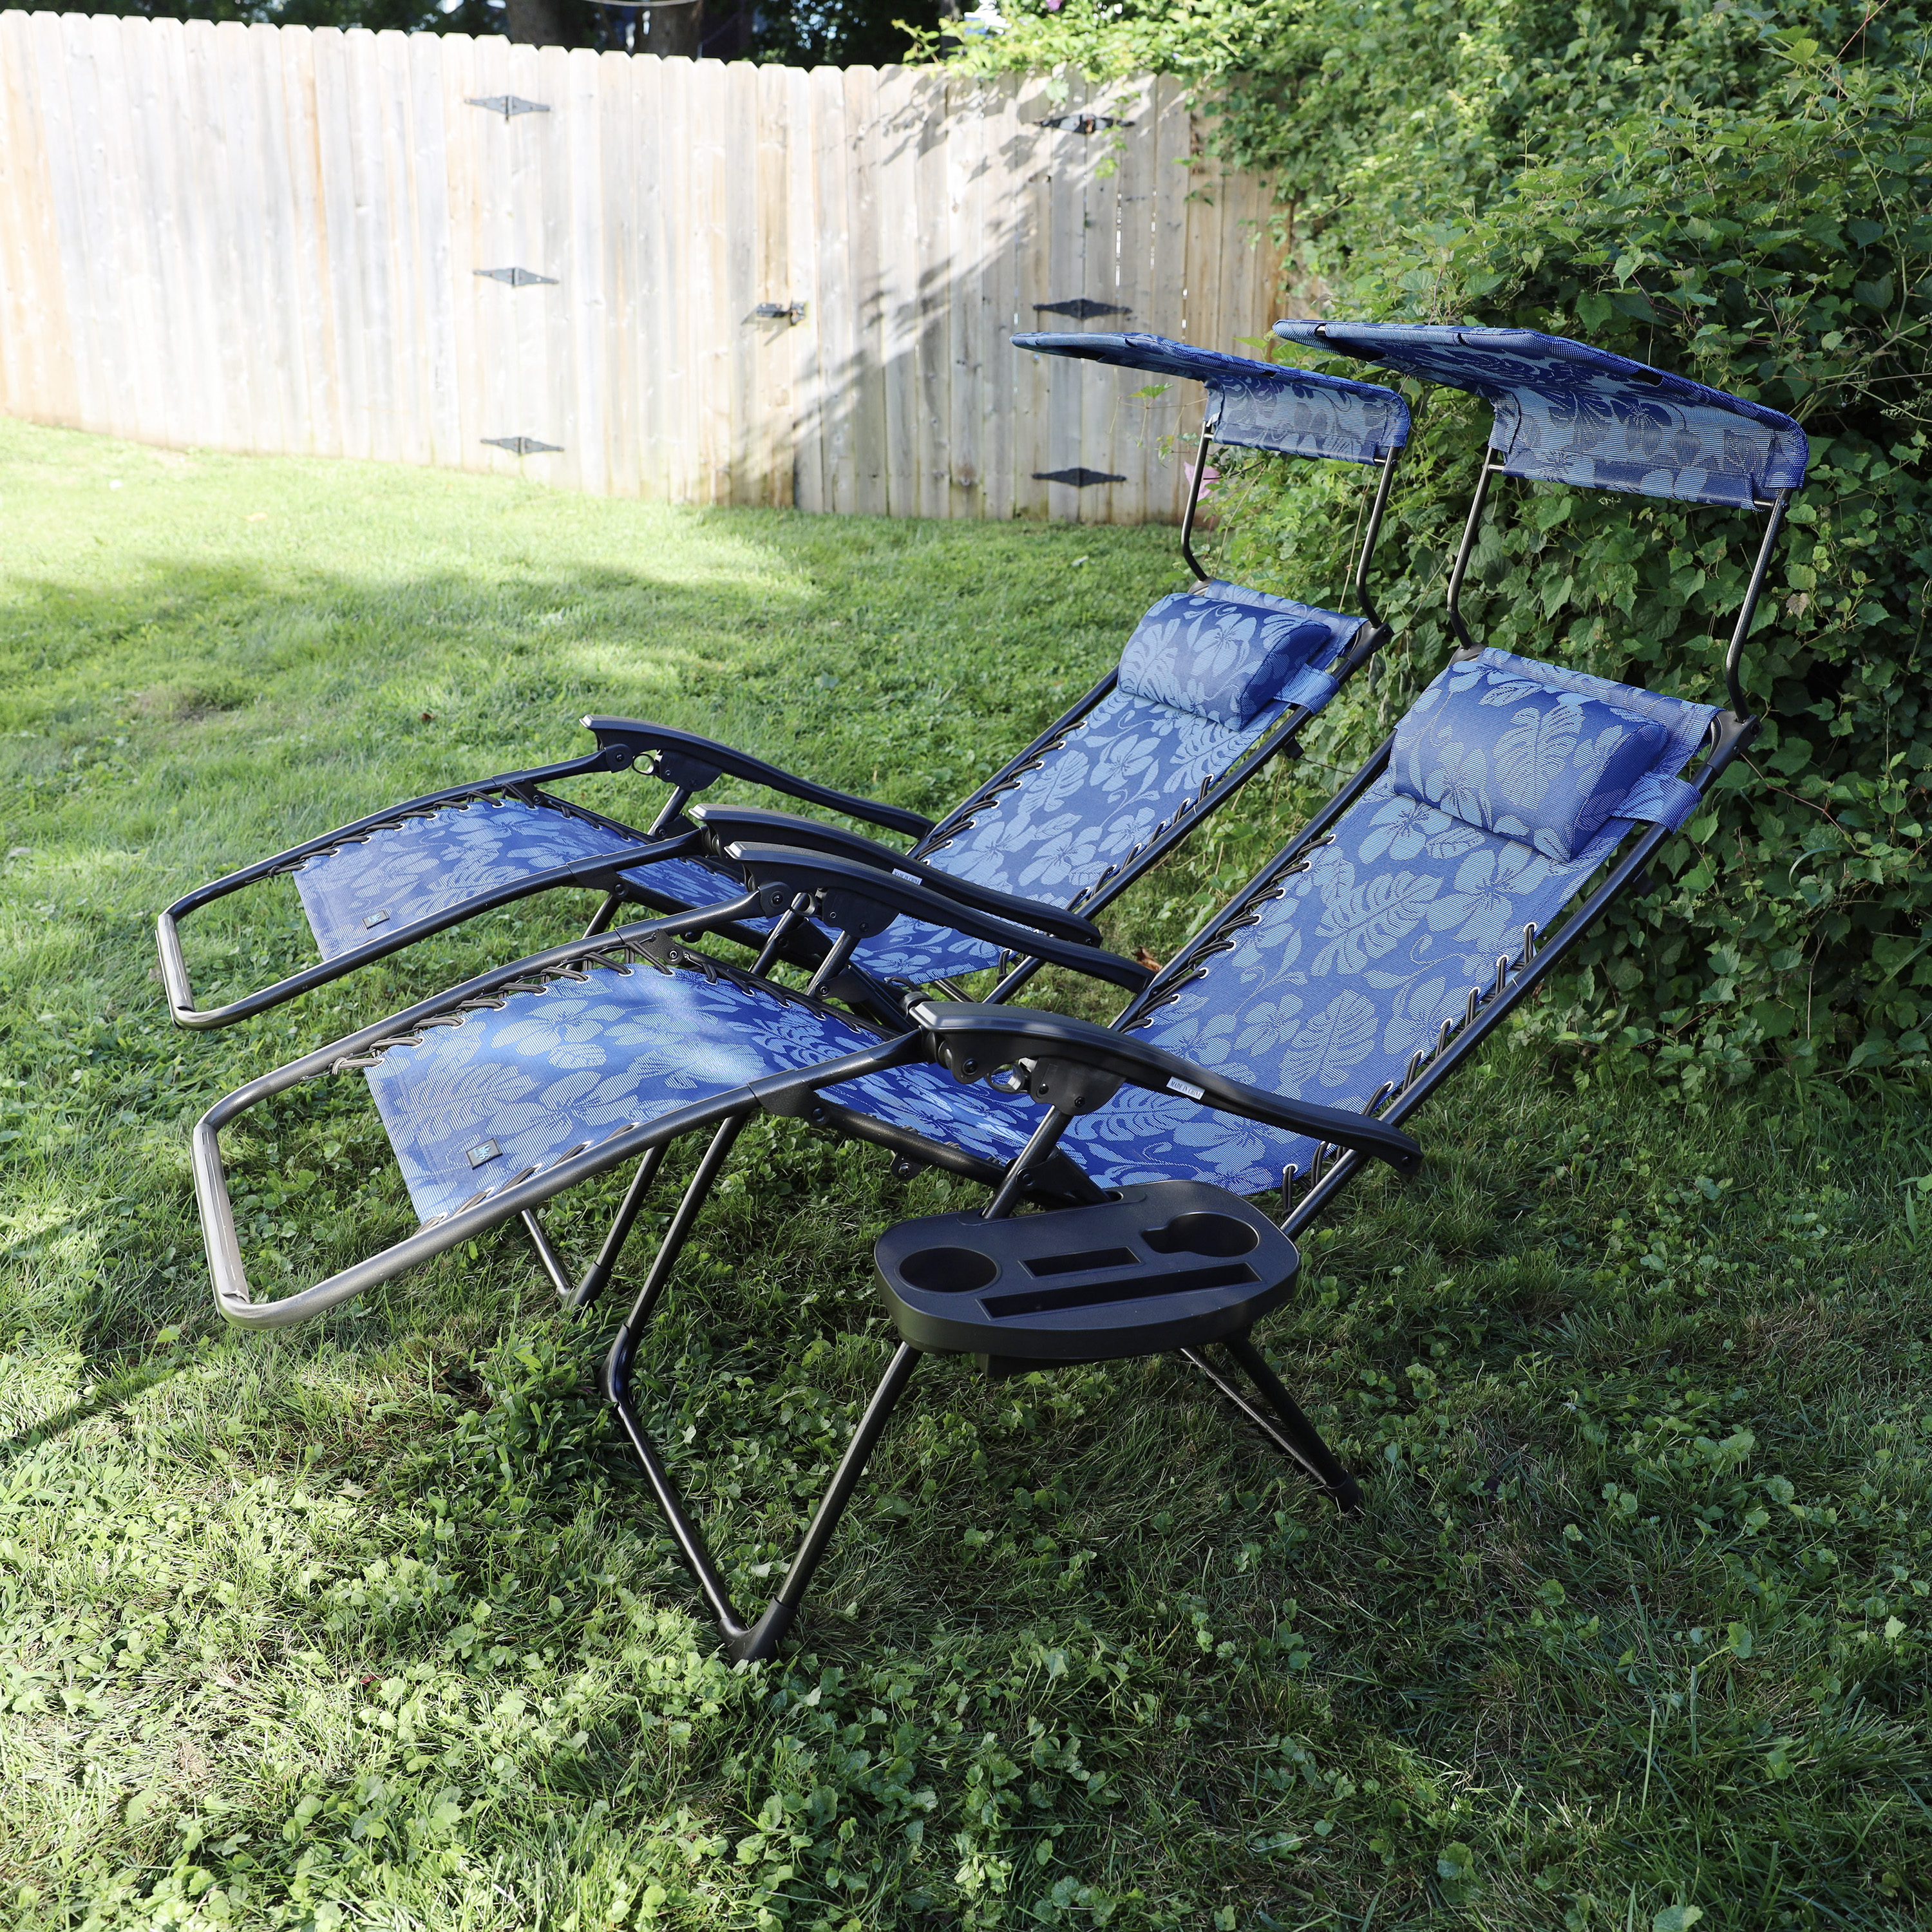 Bliss Hammocks Blue Flower 26" Wide Zero Gravity Chair w/ Adjustable Canopy, Drink Tray & Pillow, 300 Lb. Capacity - image 3 of 13